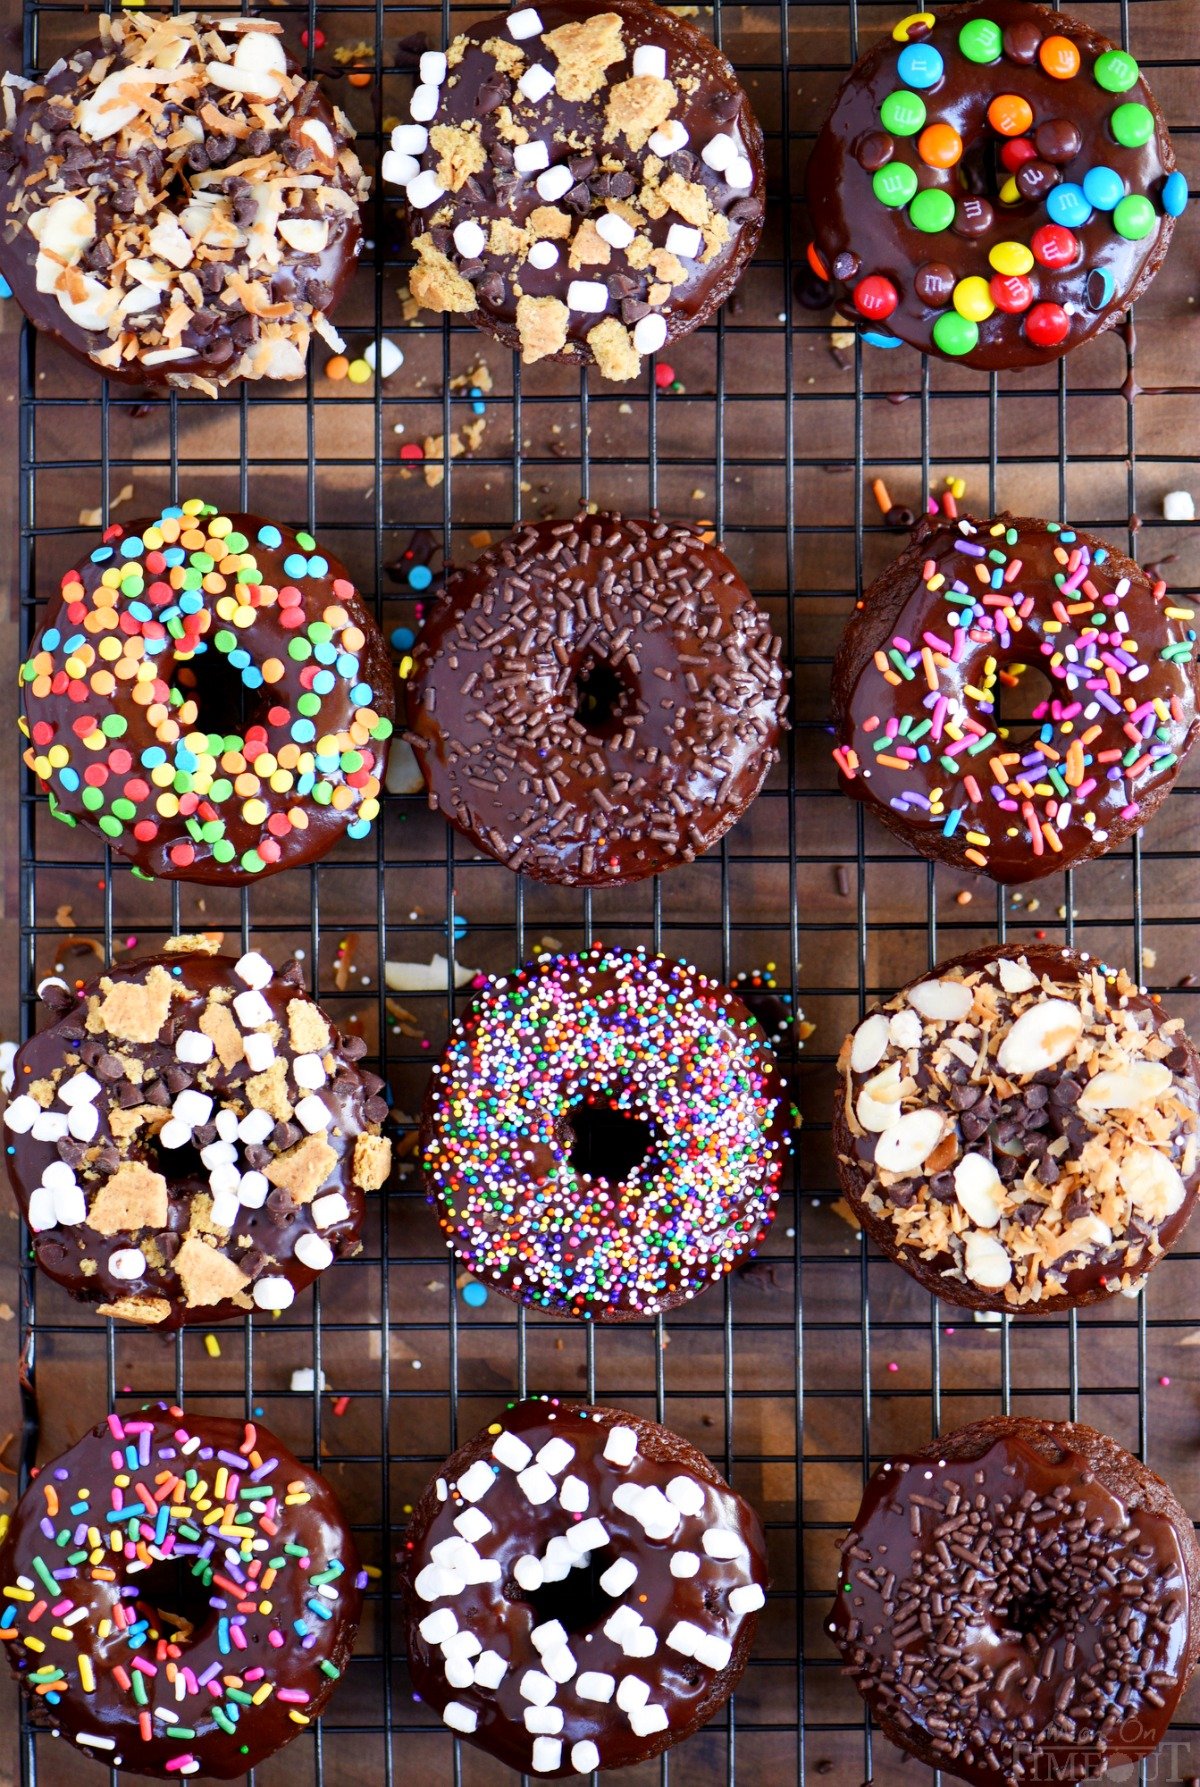 Start your mornings off right with CHOCOLATE! These Chocolate Cake Mix Donuts are topped with a silky chocolate glaze and an assortment of fun toppings. S'mores, Almond Joy, sprinkles - which will be your new favorite? // Mom On Timeout 